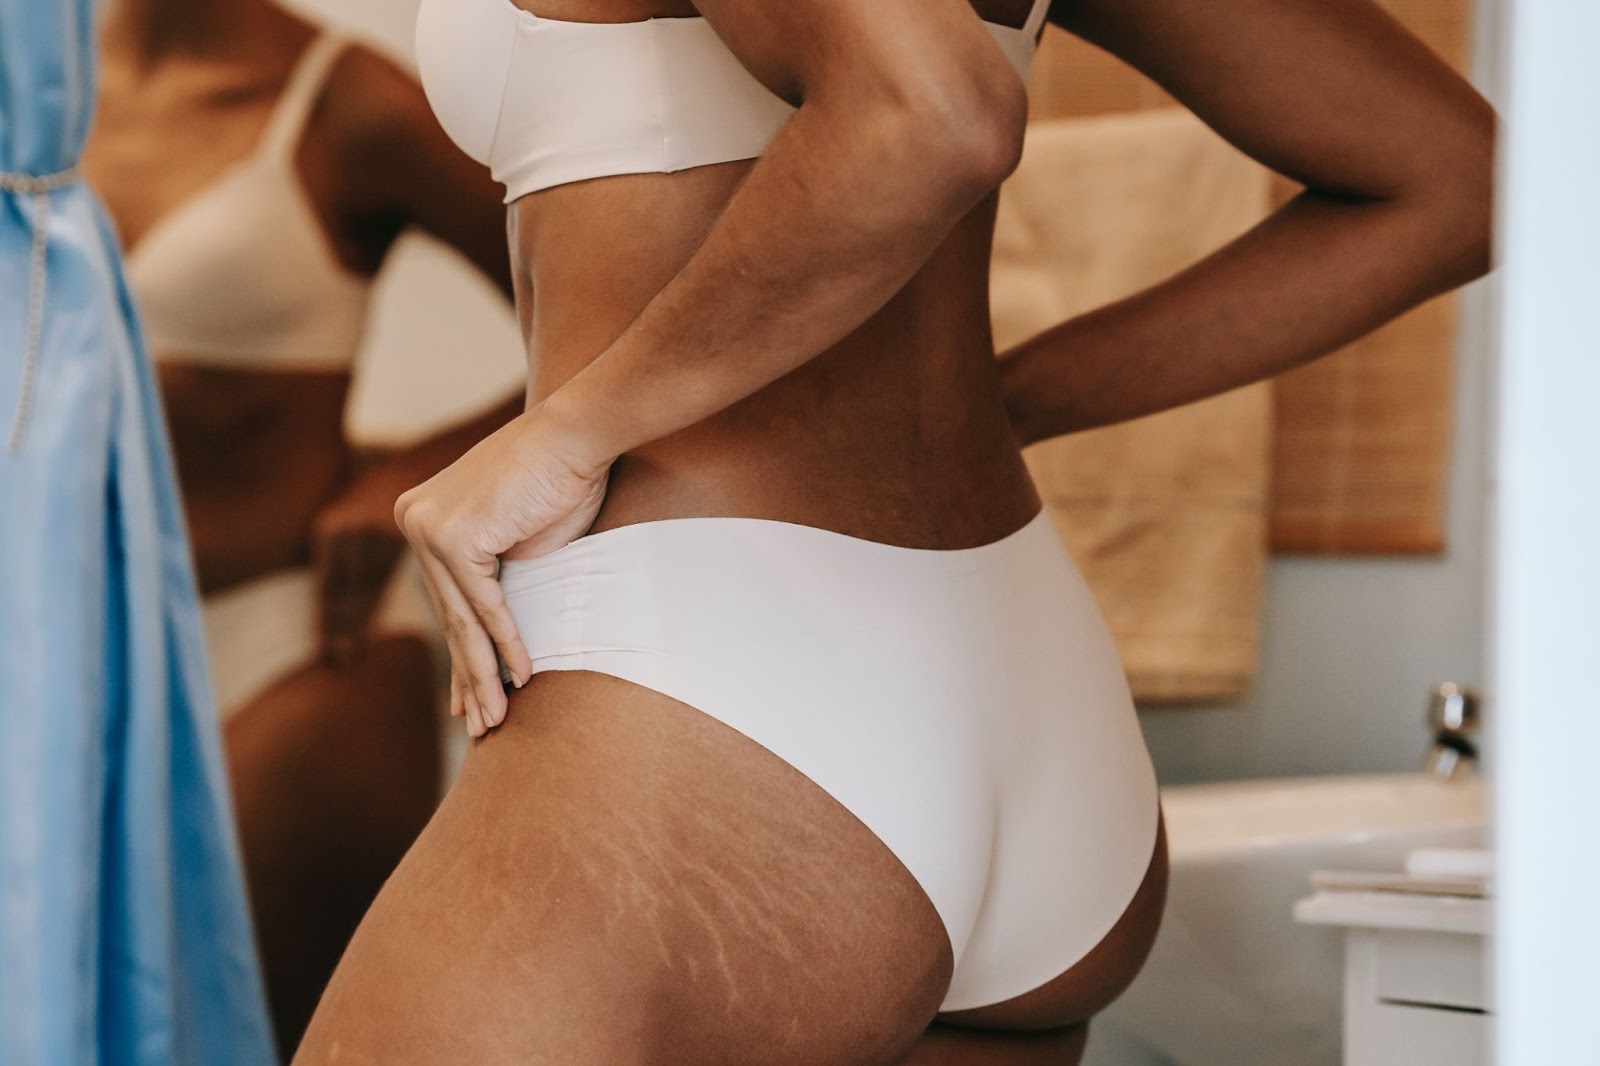 Butt Acne: How to Treat These Annoying Breakouts – Bawdy Beauty